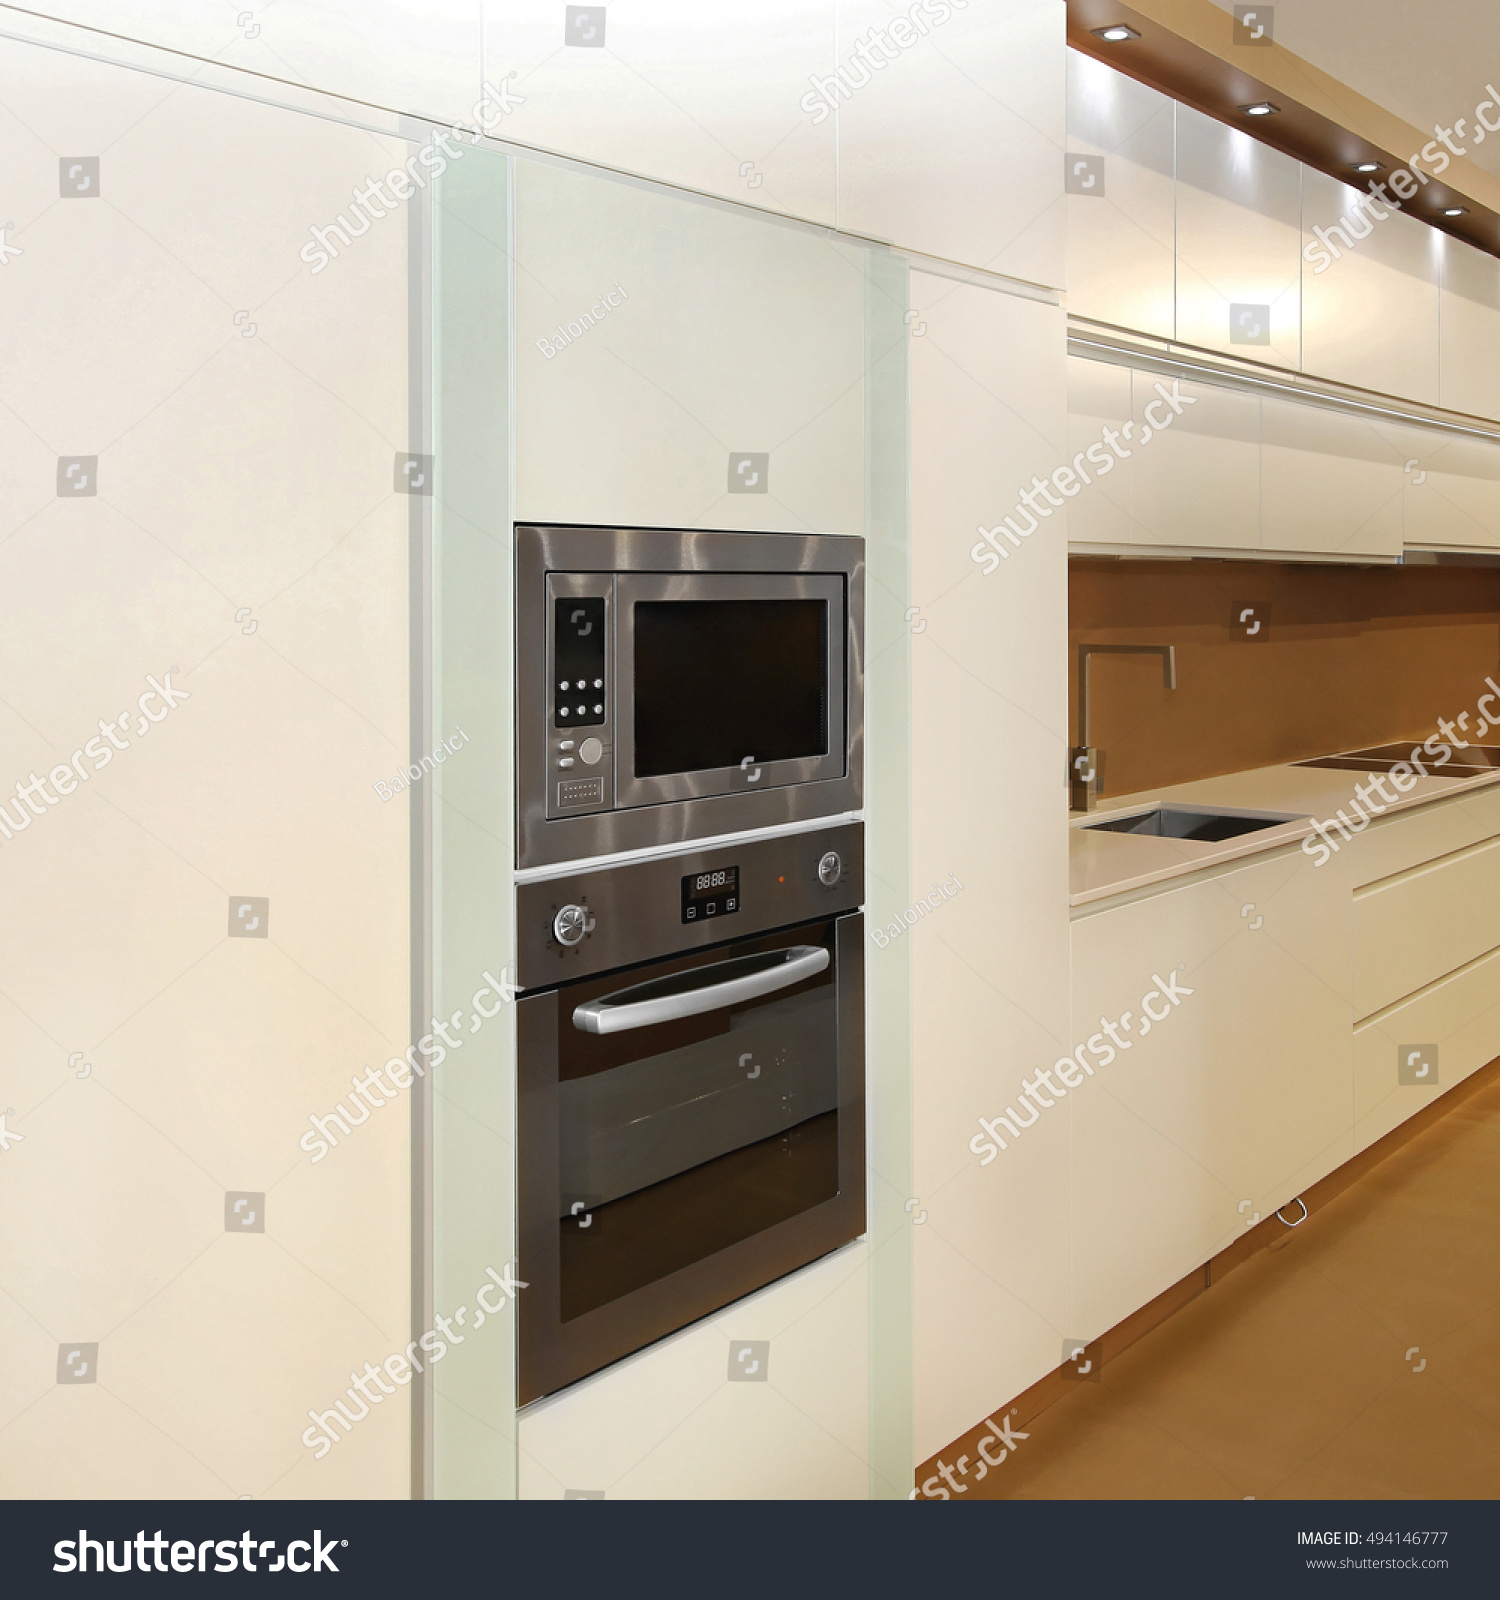 Microwave Convection Oven Built New Cabinet Stock Photo 494146777